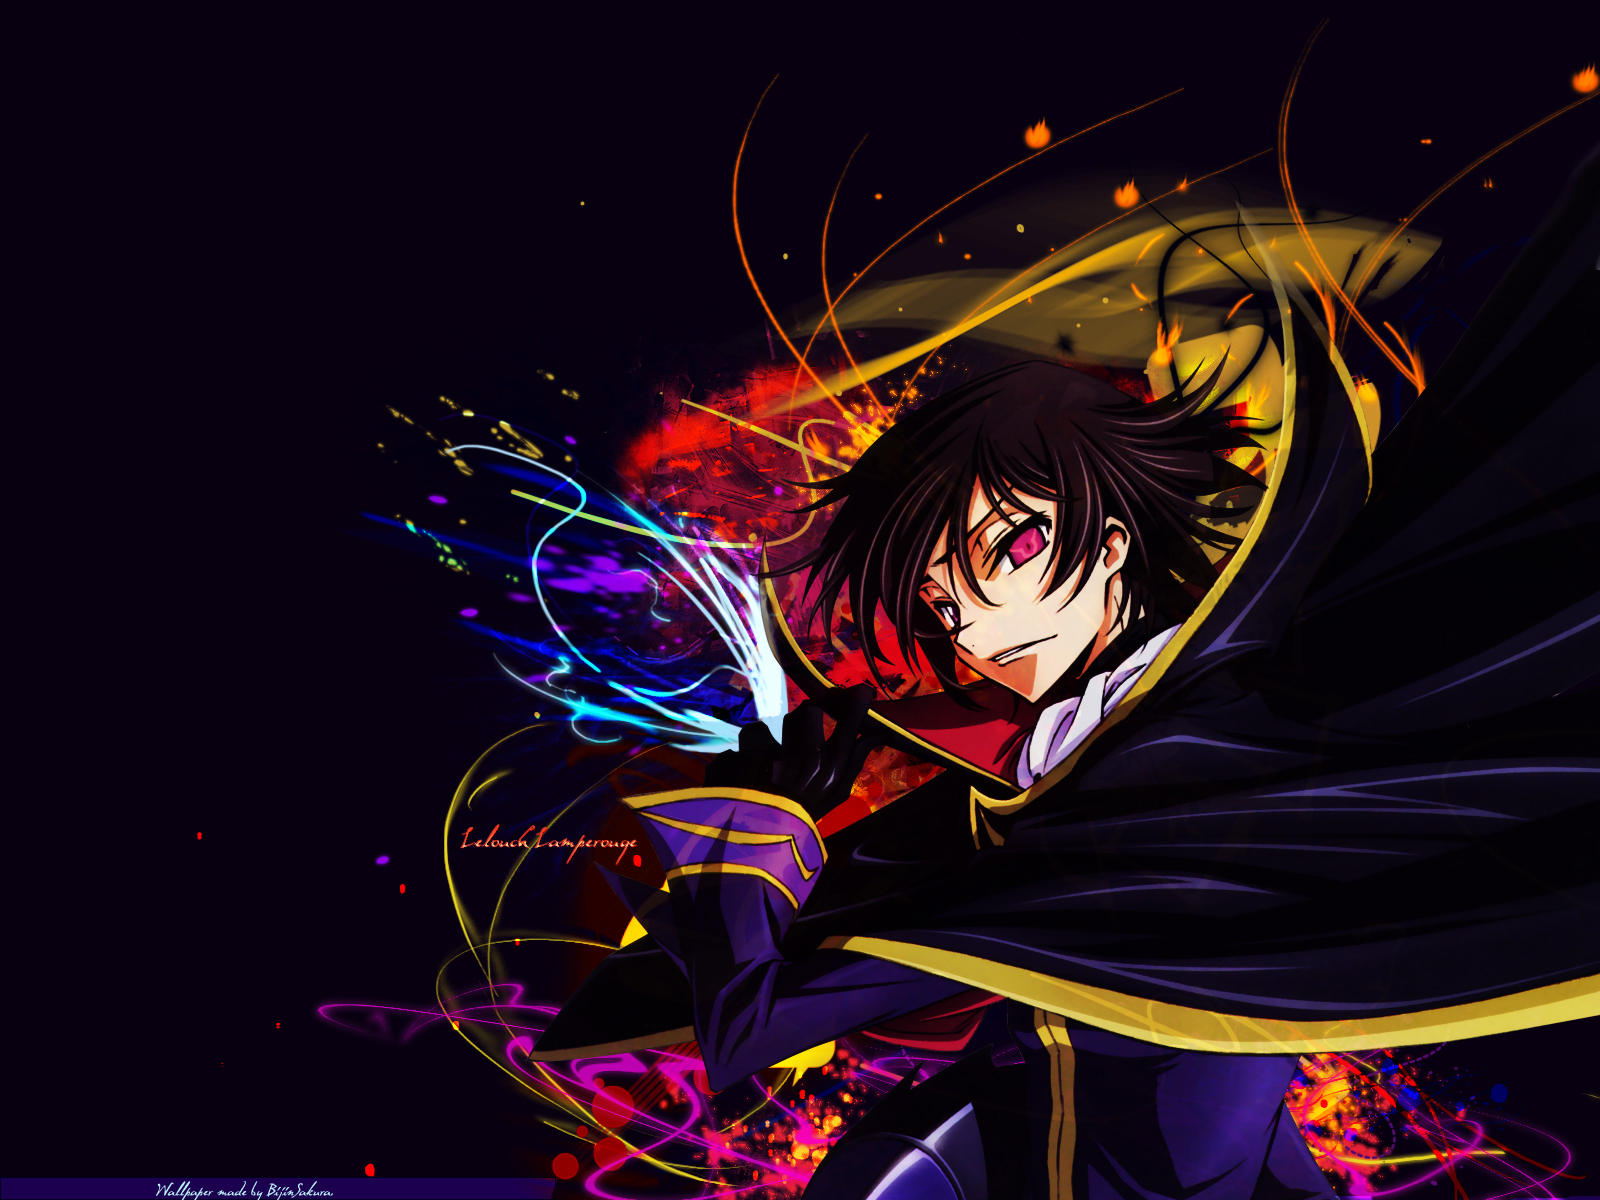  Code Geass 14426 high quality Backgrounds for mobile iphone desktop